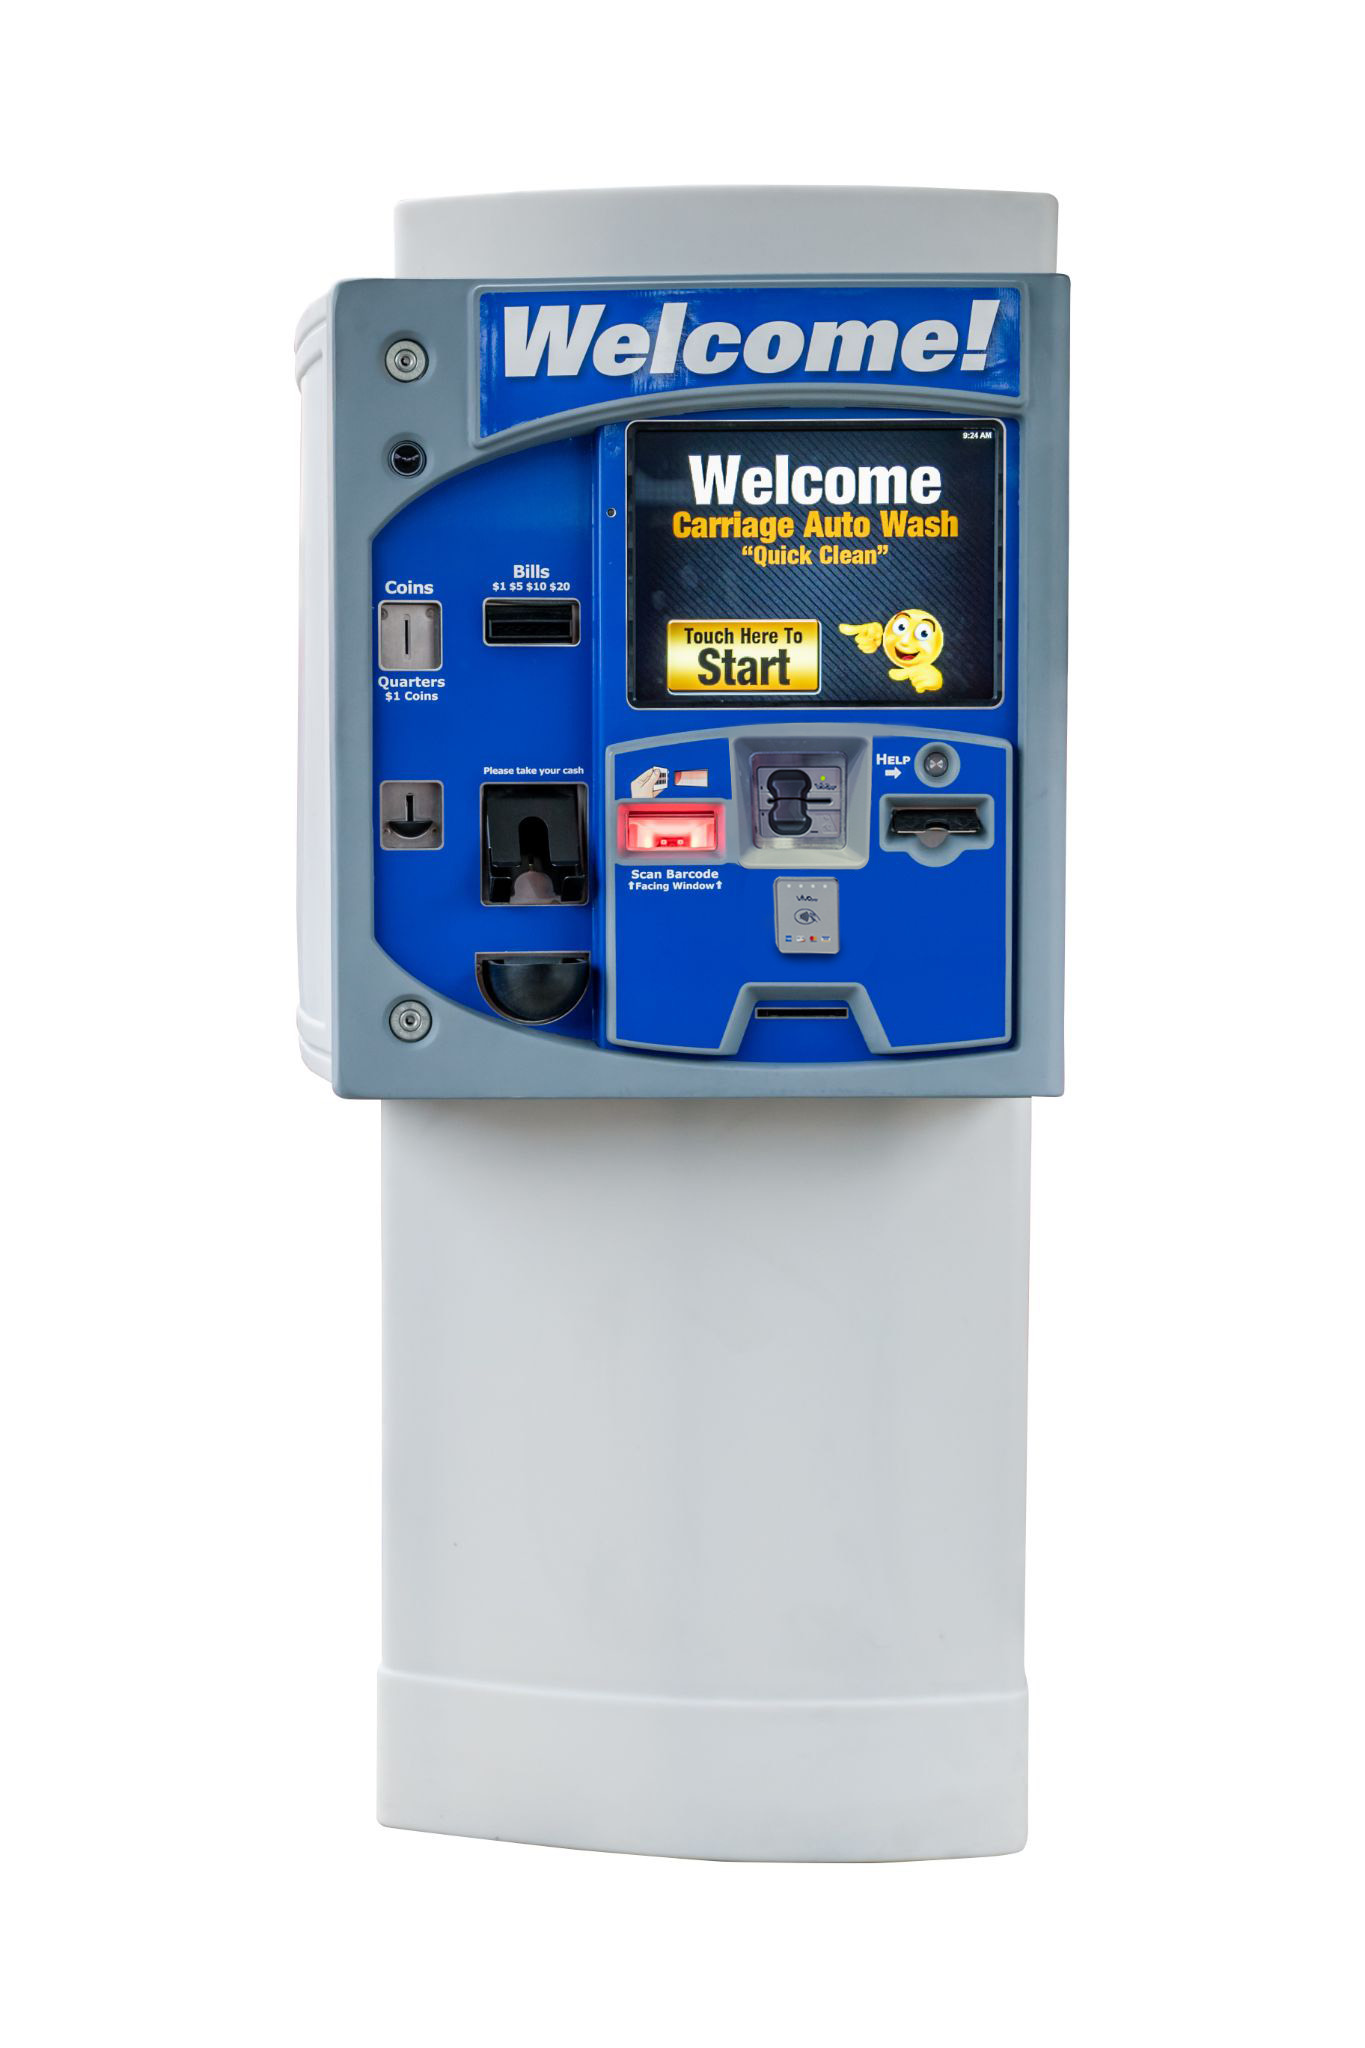 DRB's XPT 5+ car wash pay station with no background